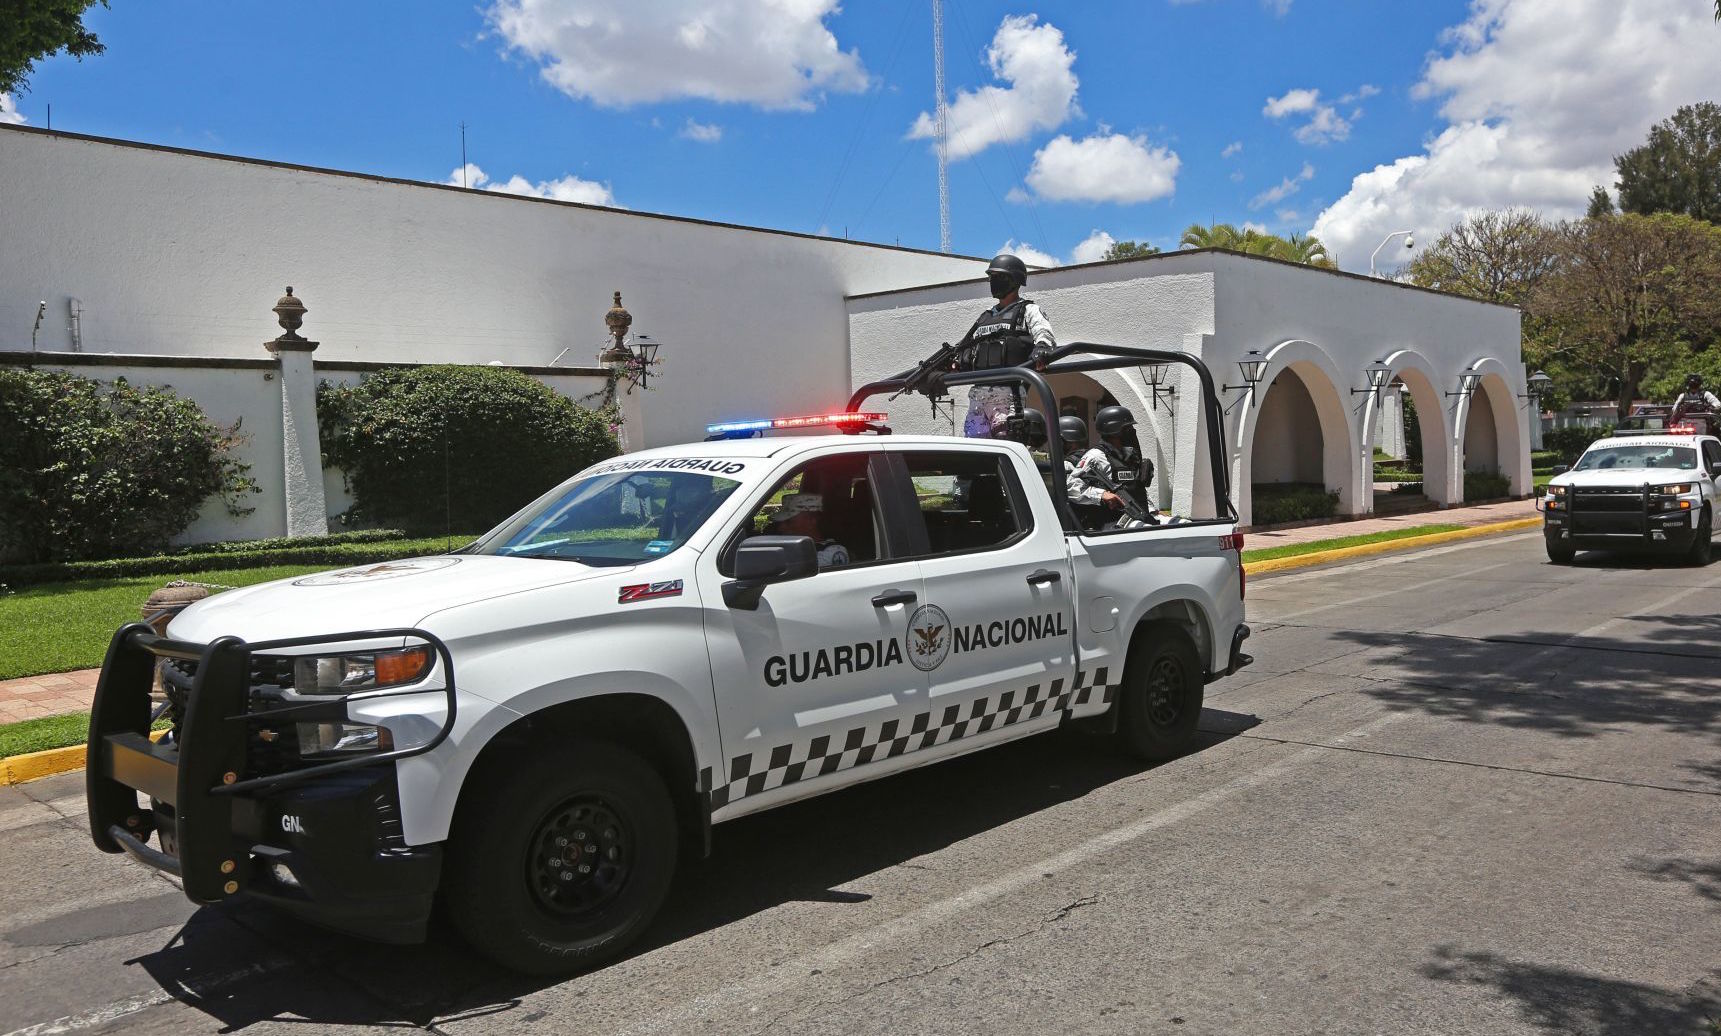 State police commit suicide in rest area attached to Casa Jalisco